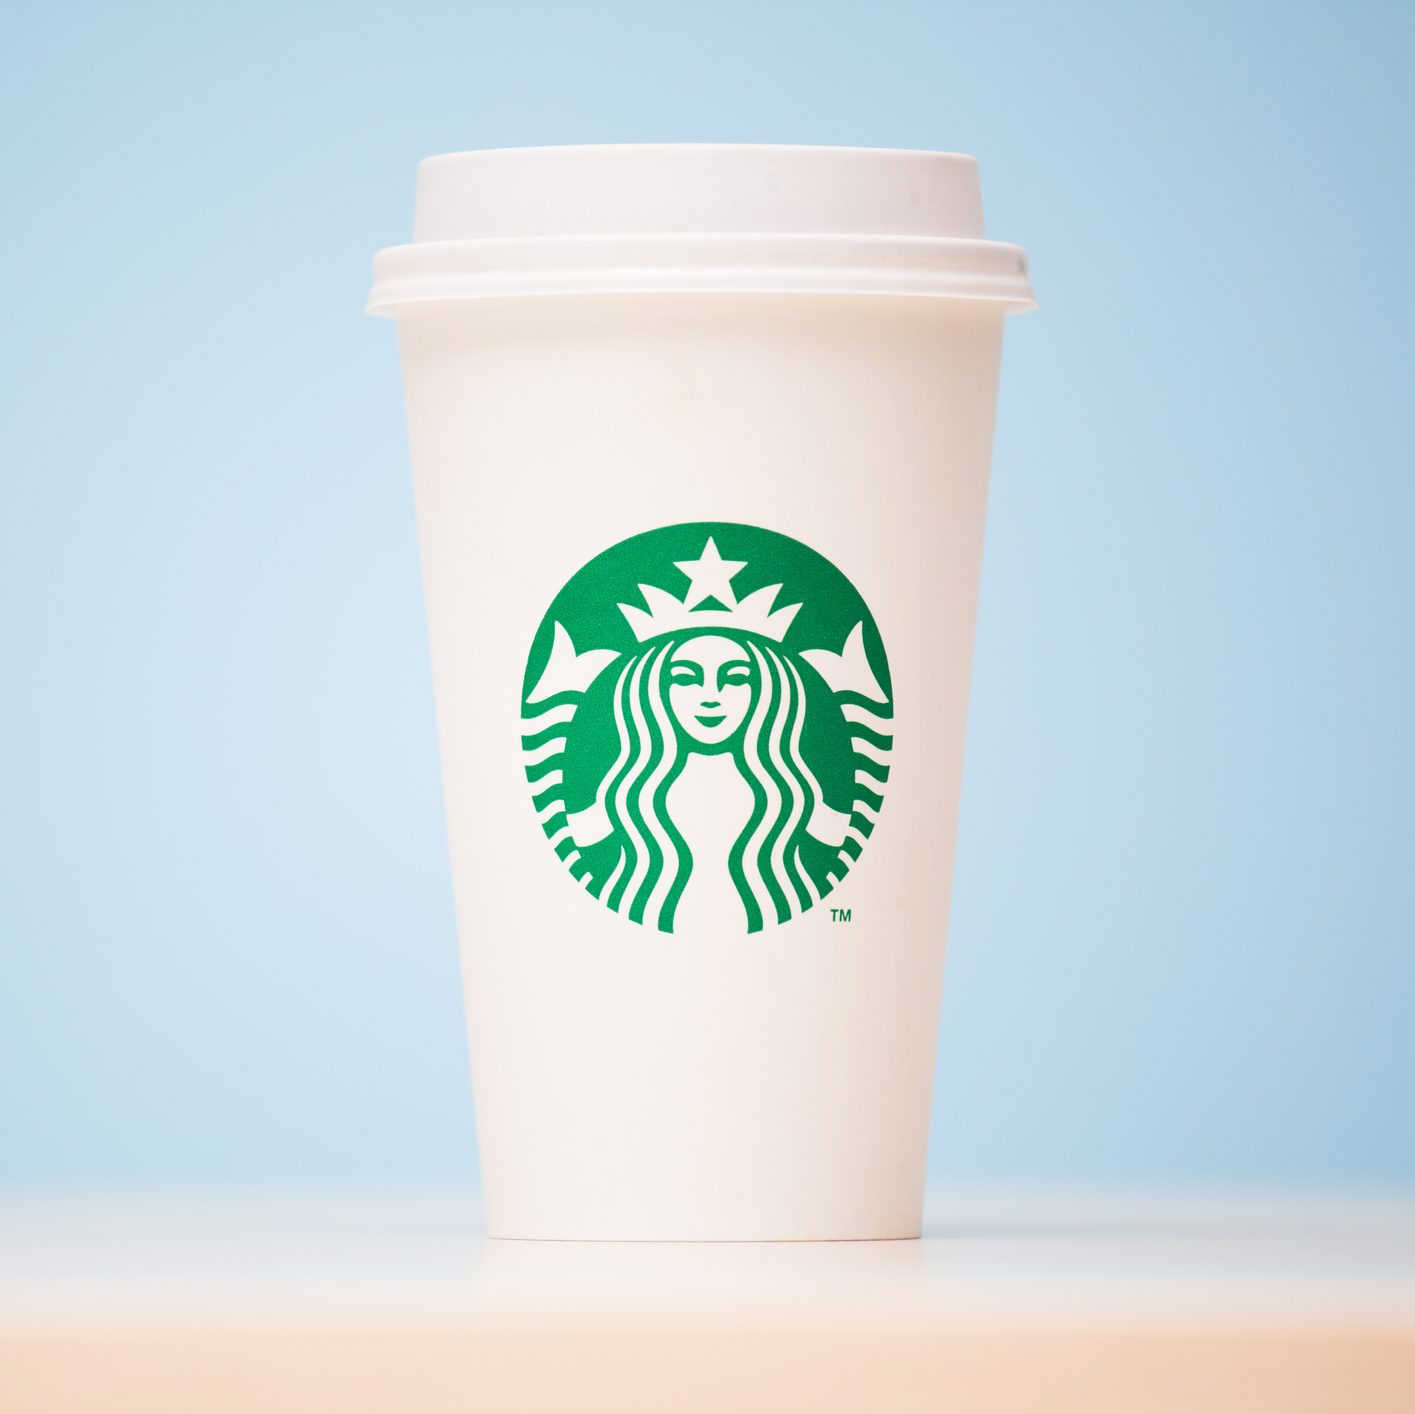 Grande Starbucks to go cup on table